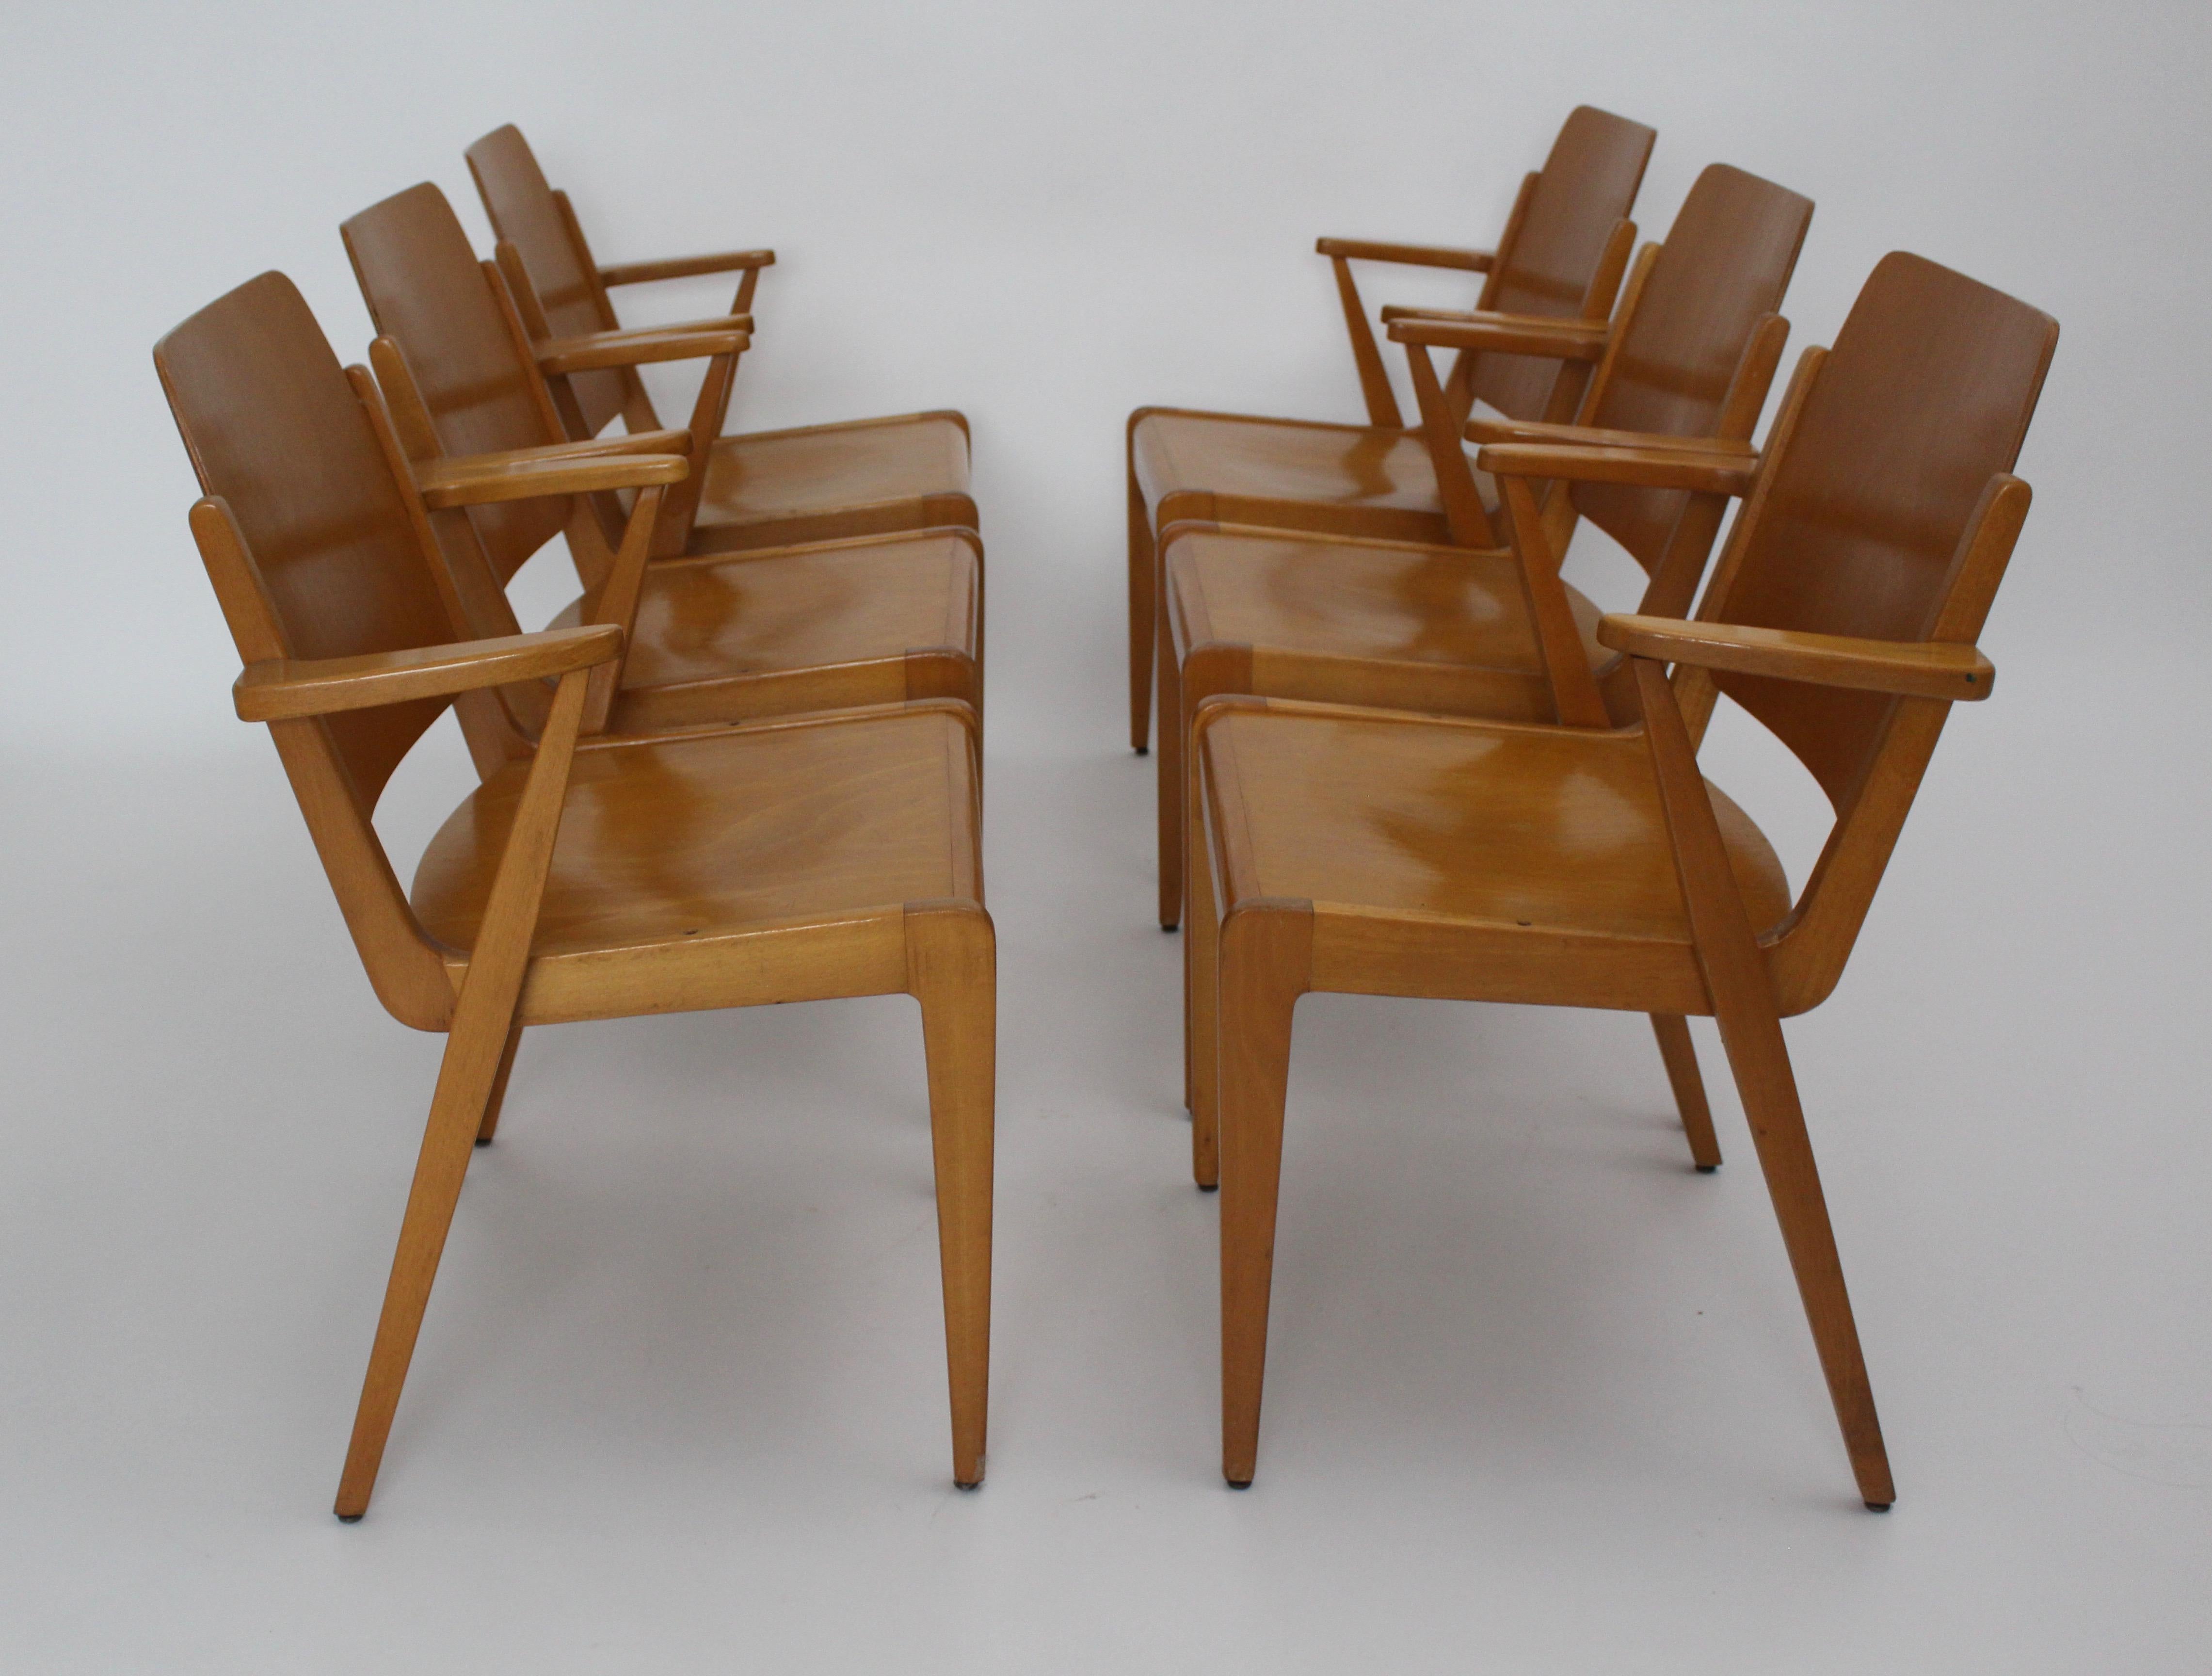 Mid Century Modern set of six dining room chairs model Austro chair with armrests designed by Franz Schuster and executed by Wiesner-Hager (labelled).
These dining room chairs are also stackable.
The materials are solid beechwood and plywood -